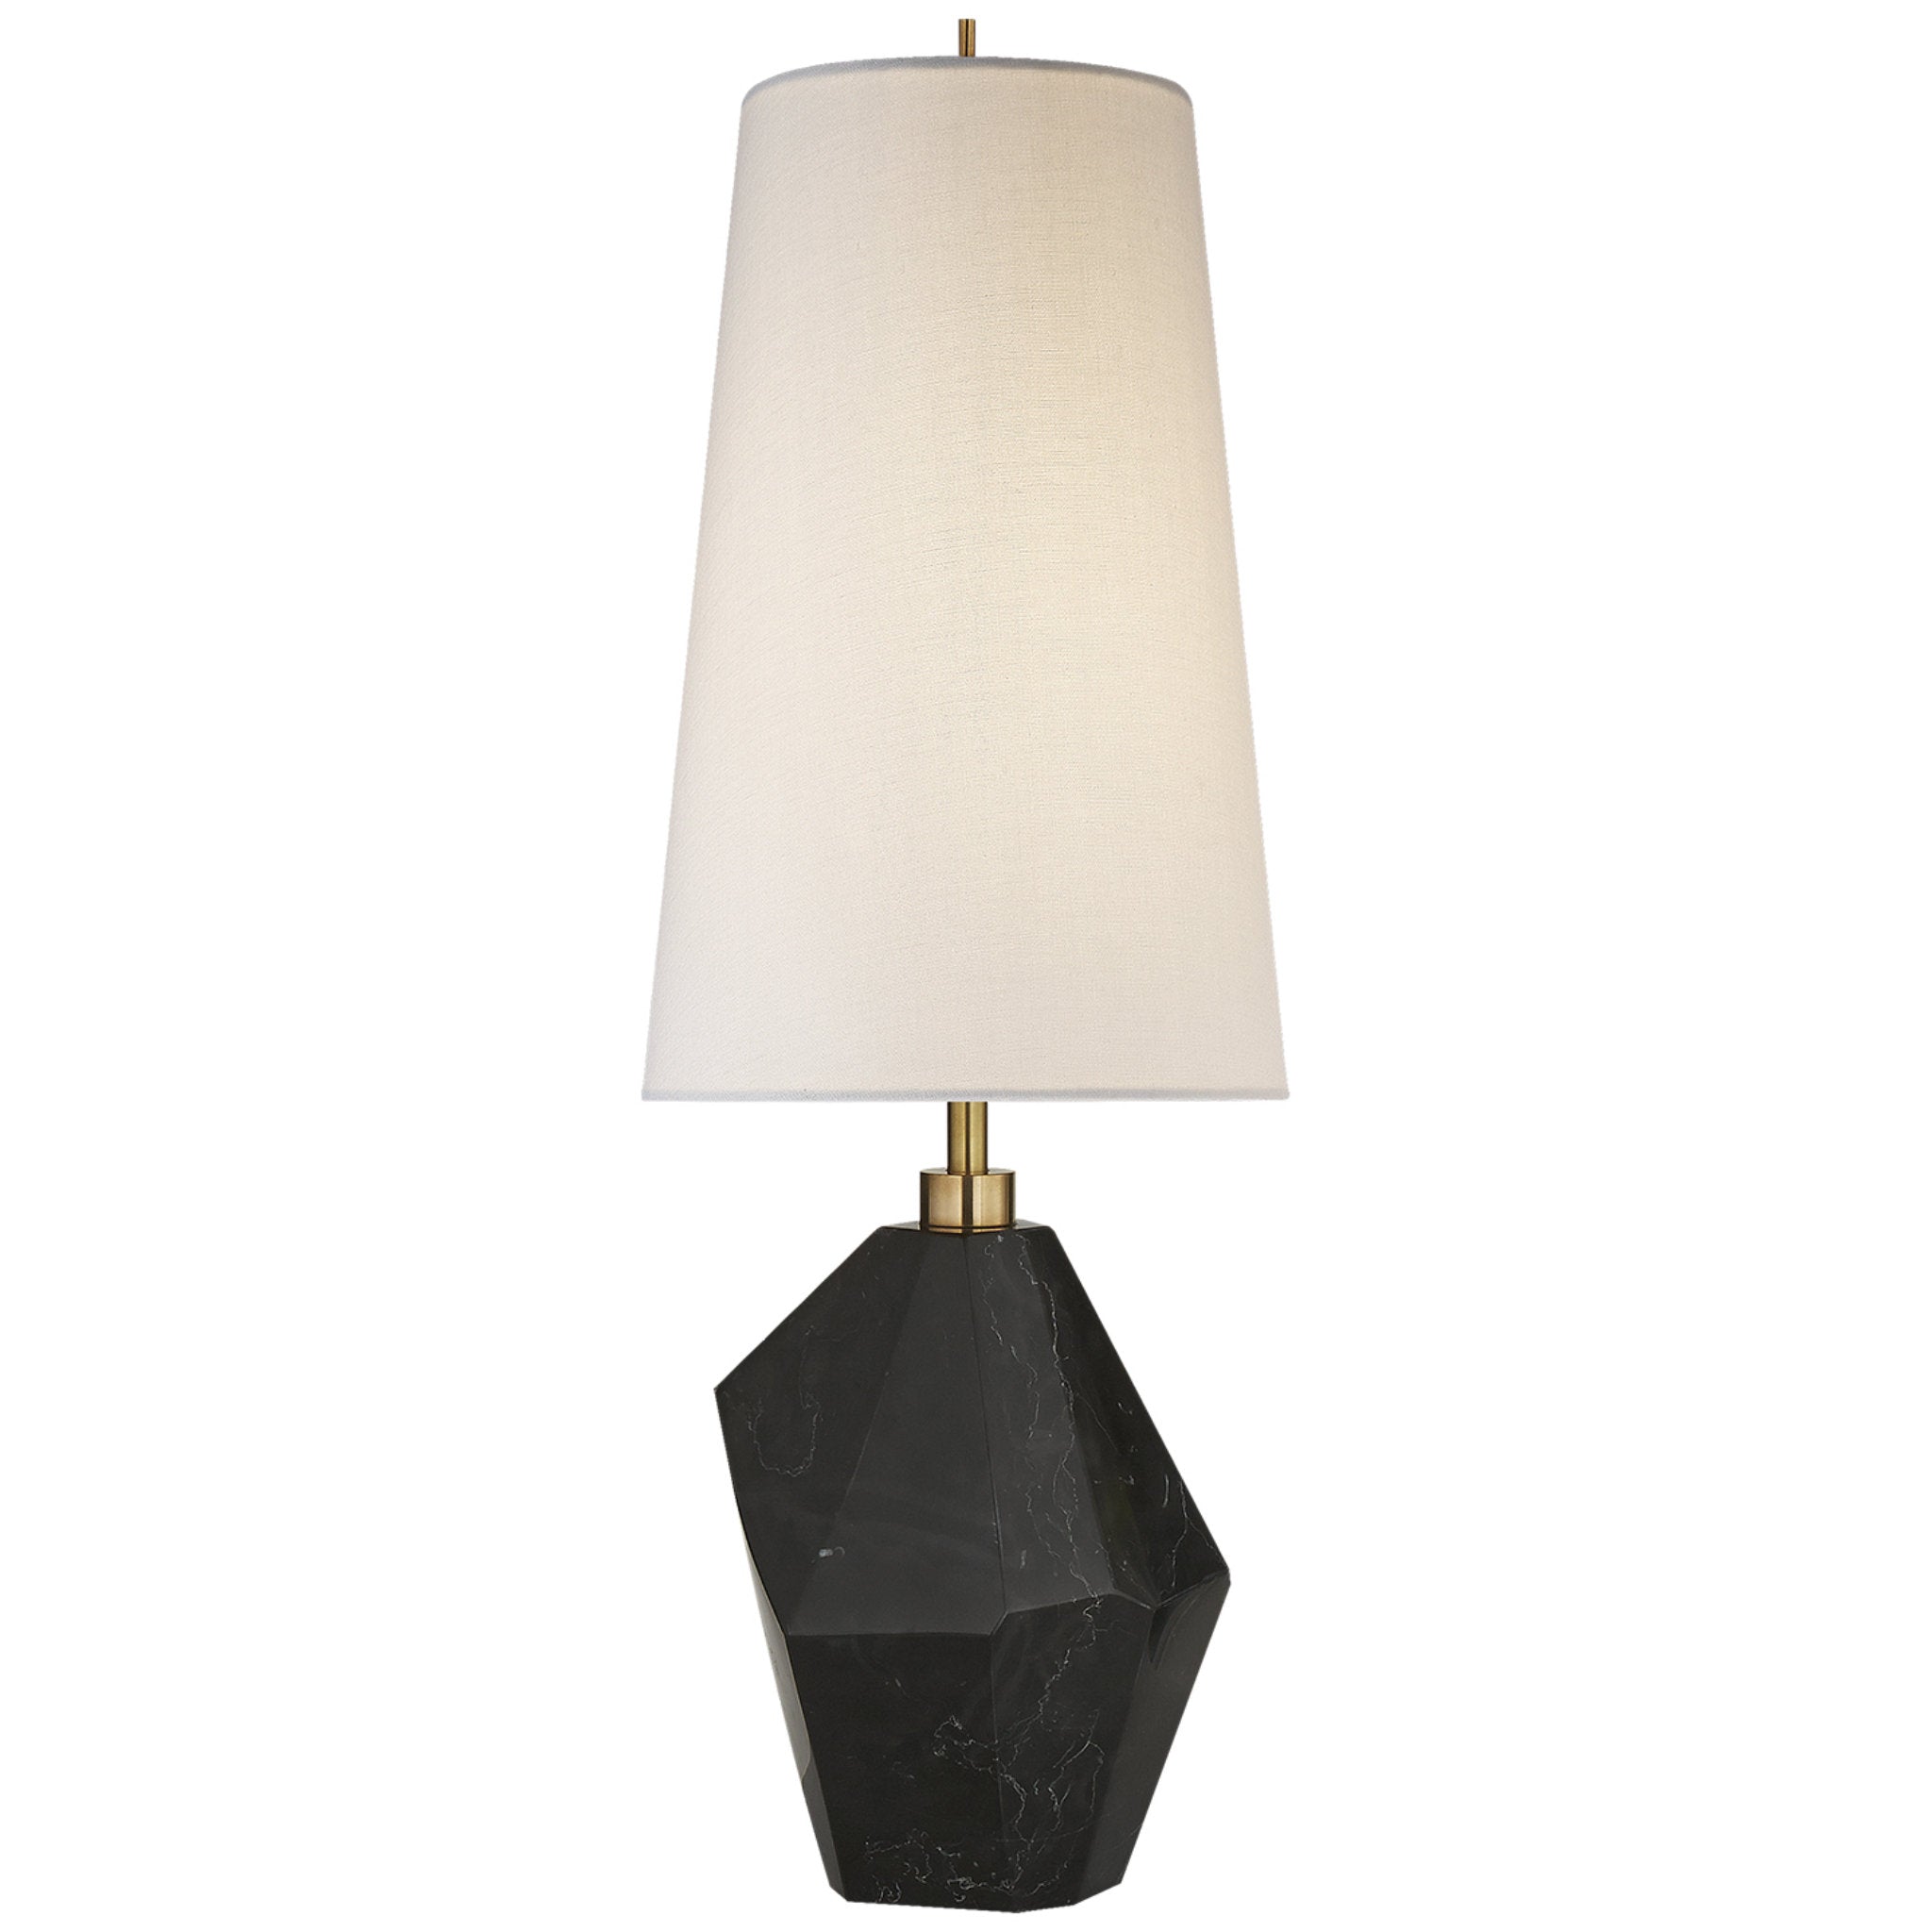 Kelly Wearstler Halcyon Accent Table Lamp in Black Cremo Marble with Linen Shade